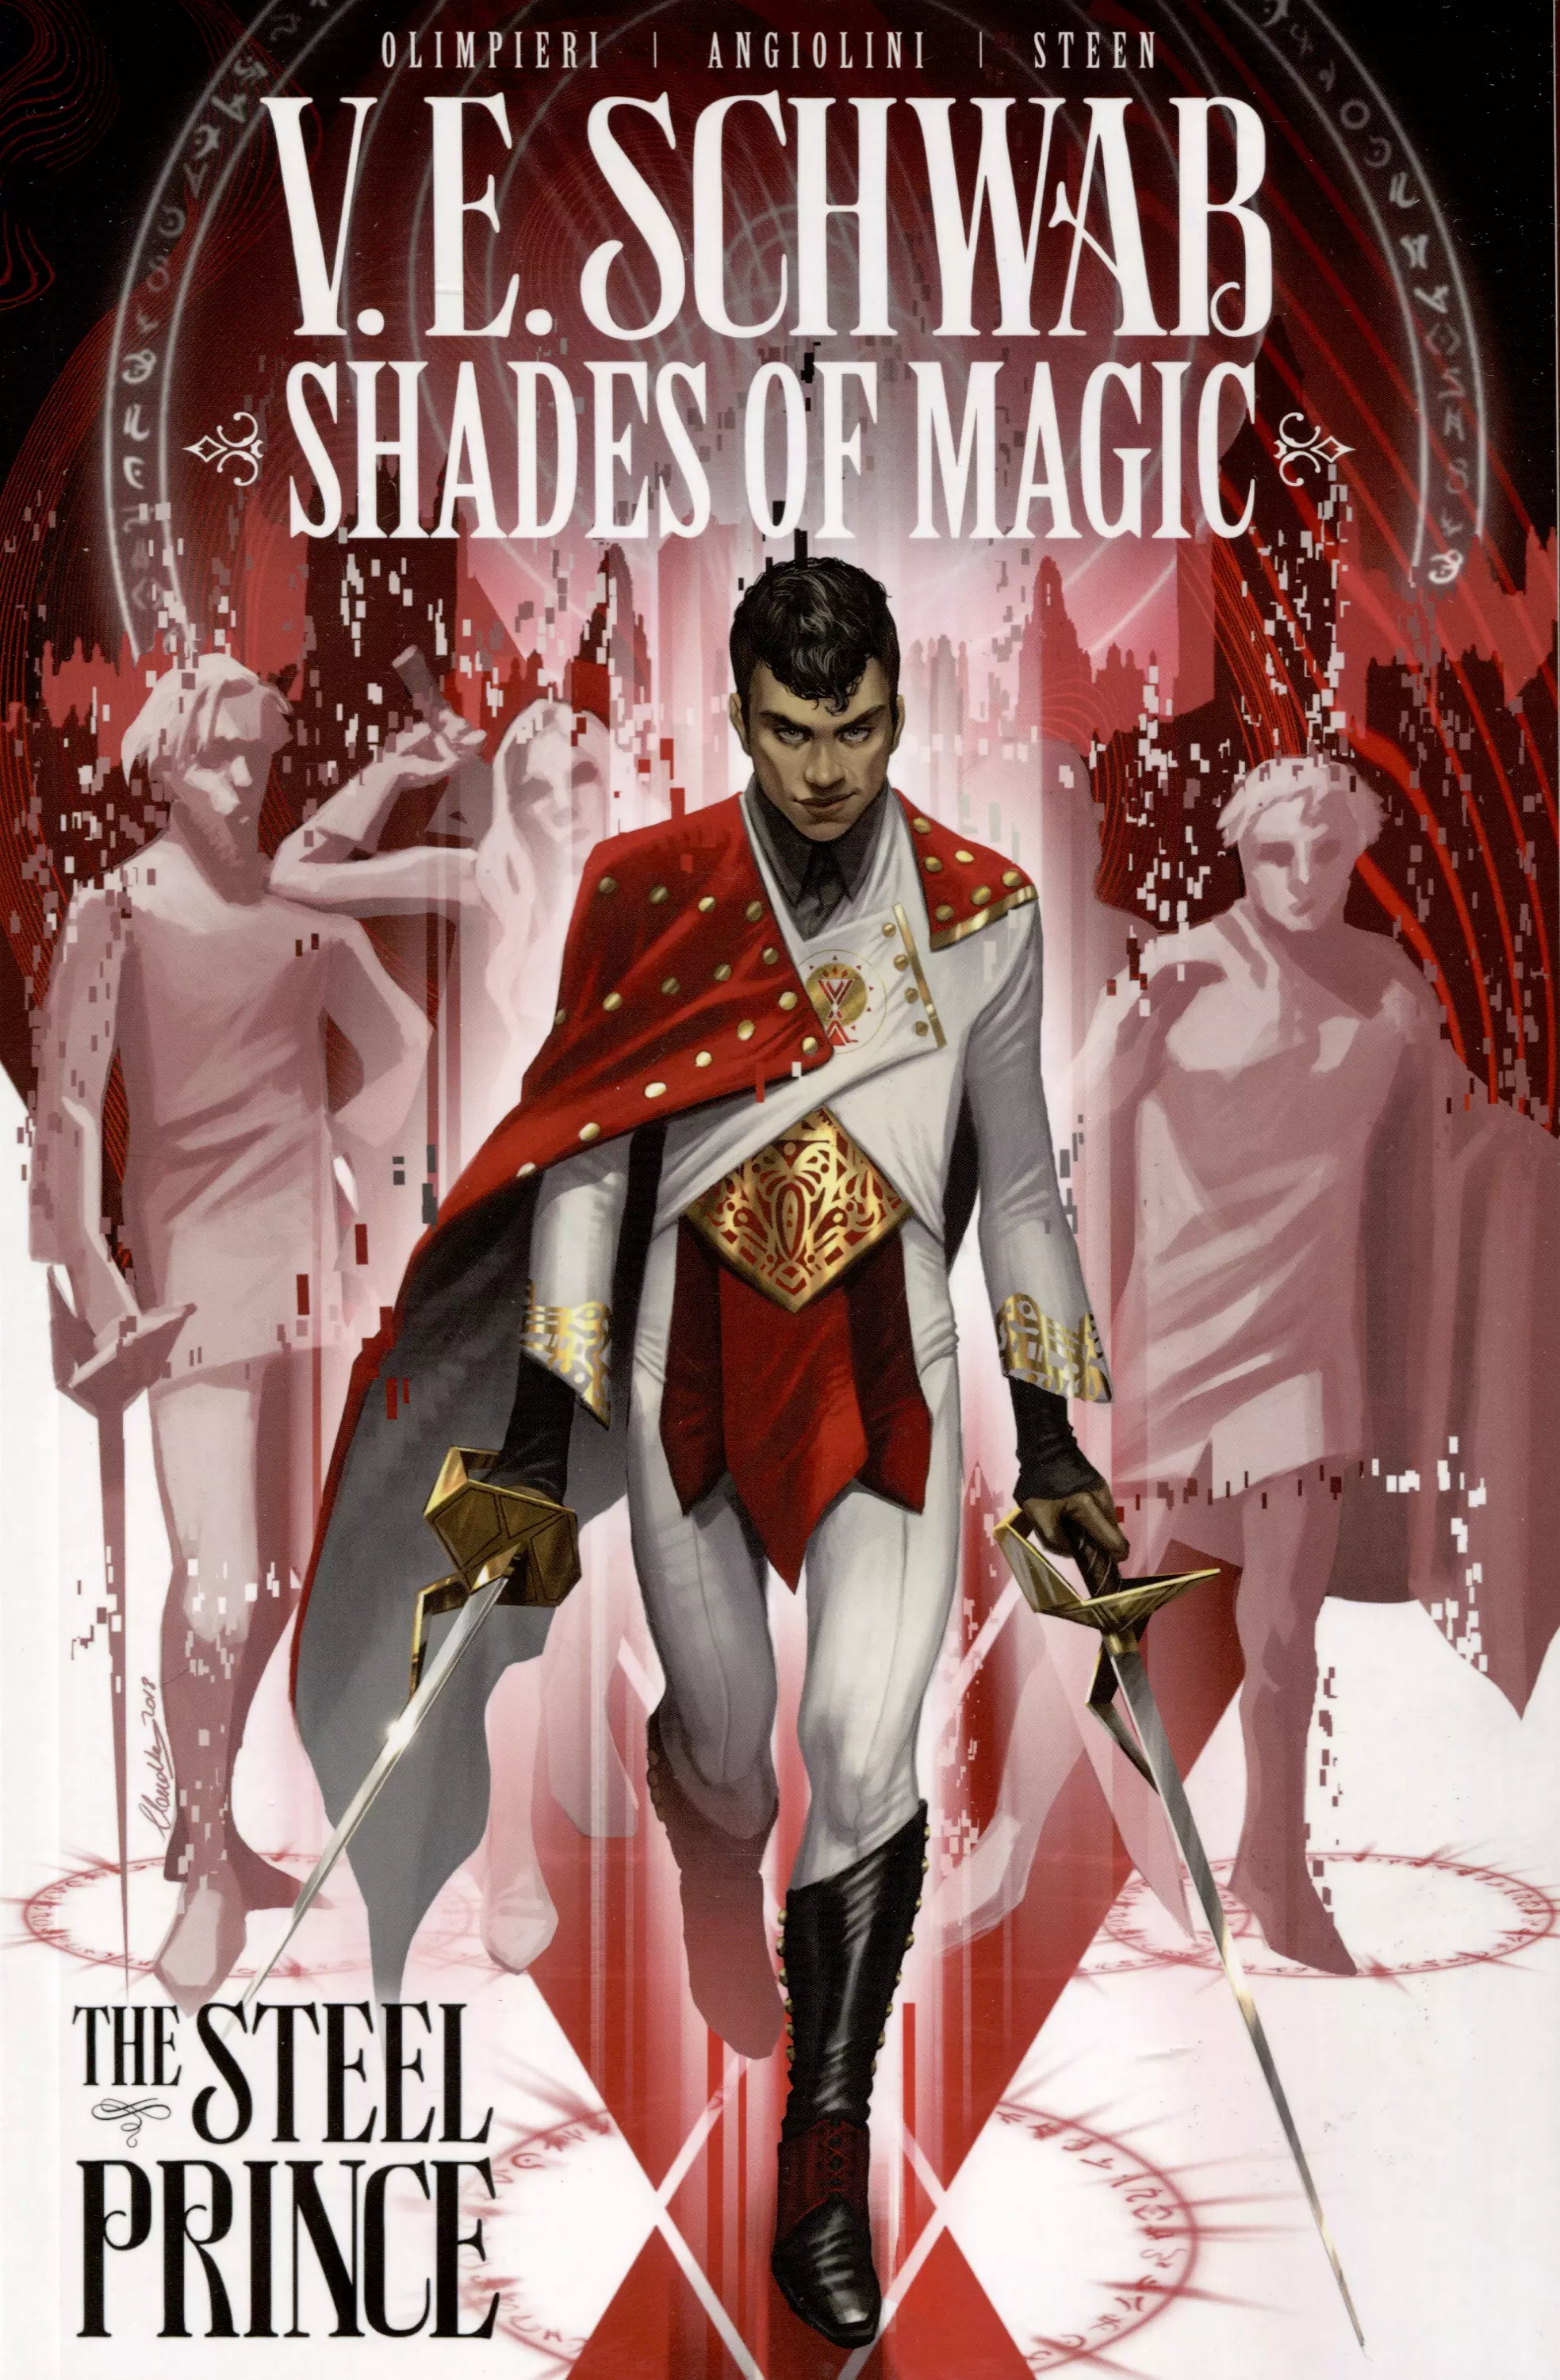 Shades of Magic. The Steel Prince